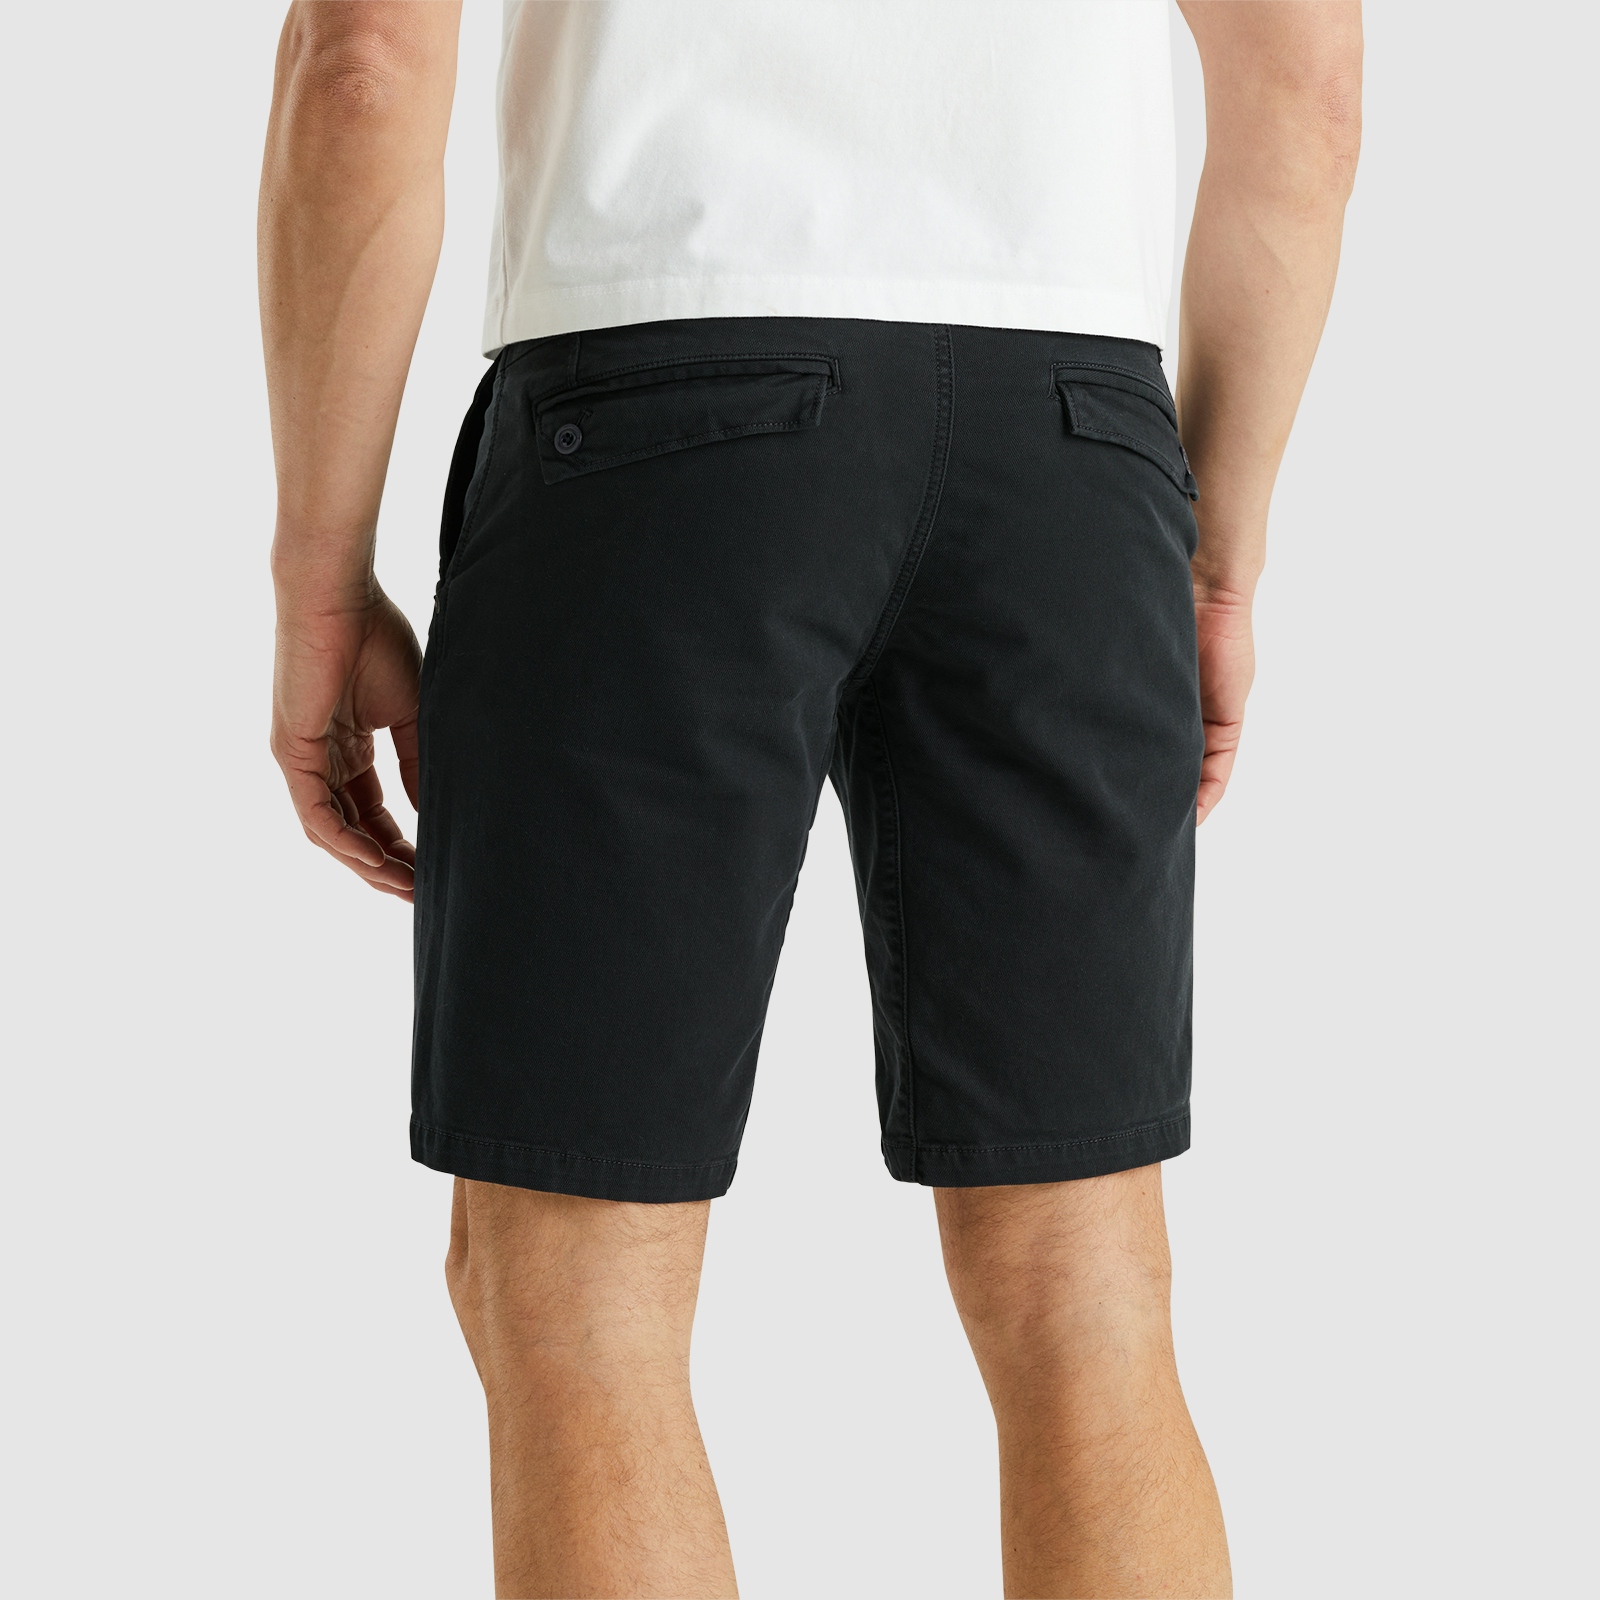 PME Legend TWIN WASP CHINO SHORTS FANCY STRUCTURED Blauw-1 2